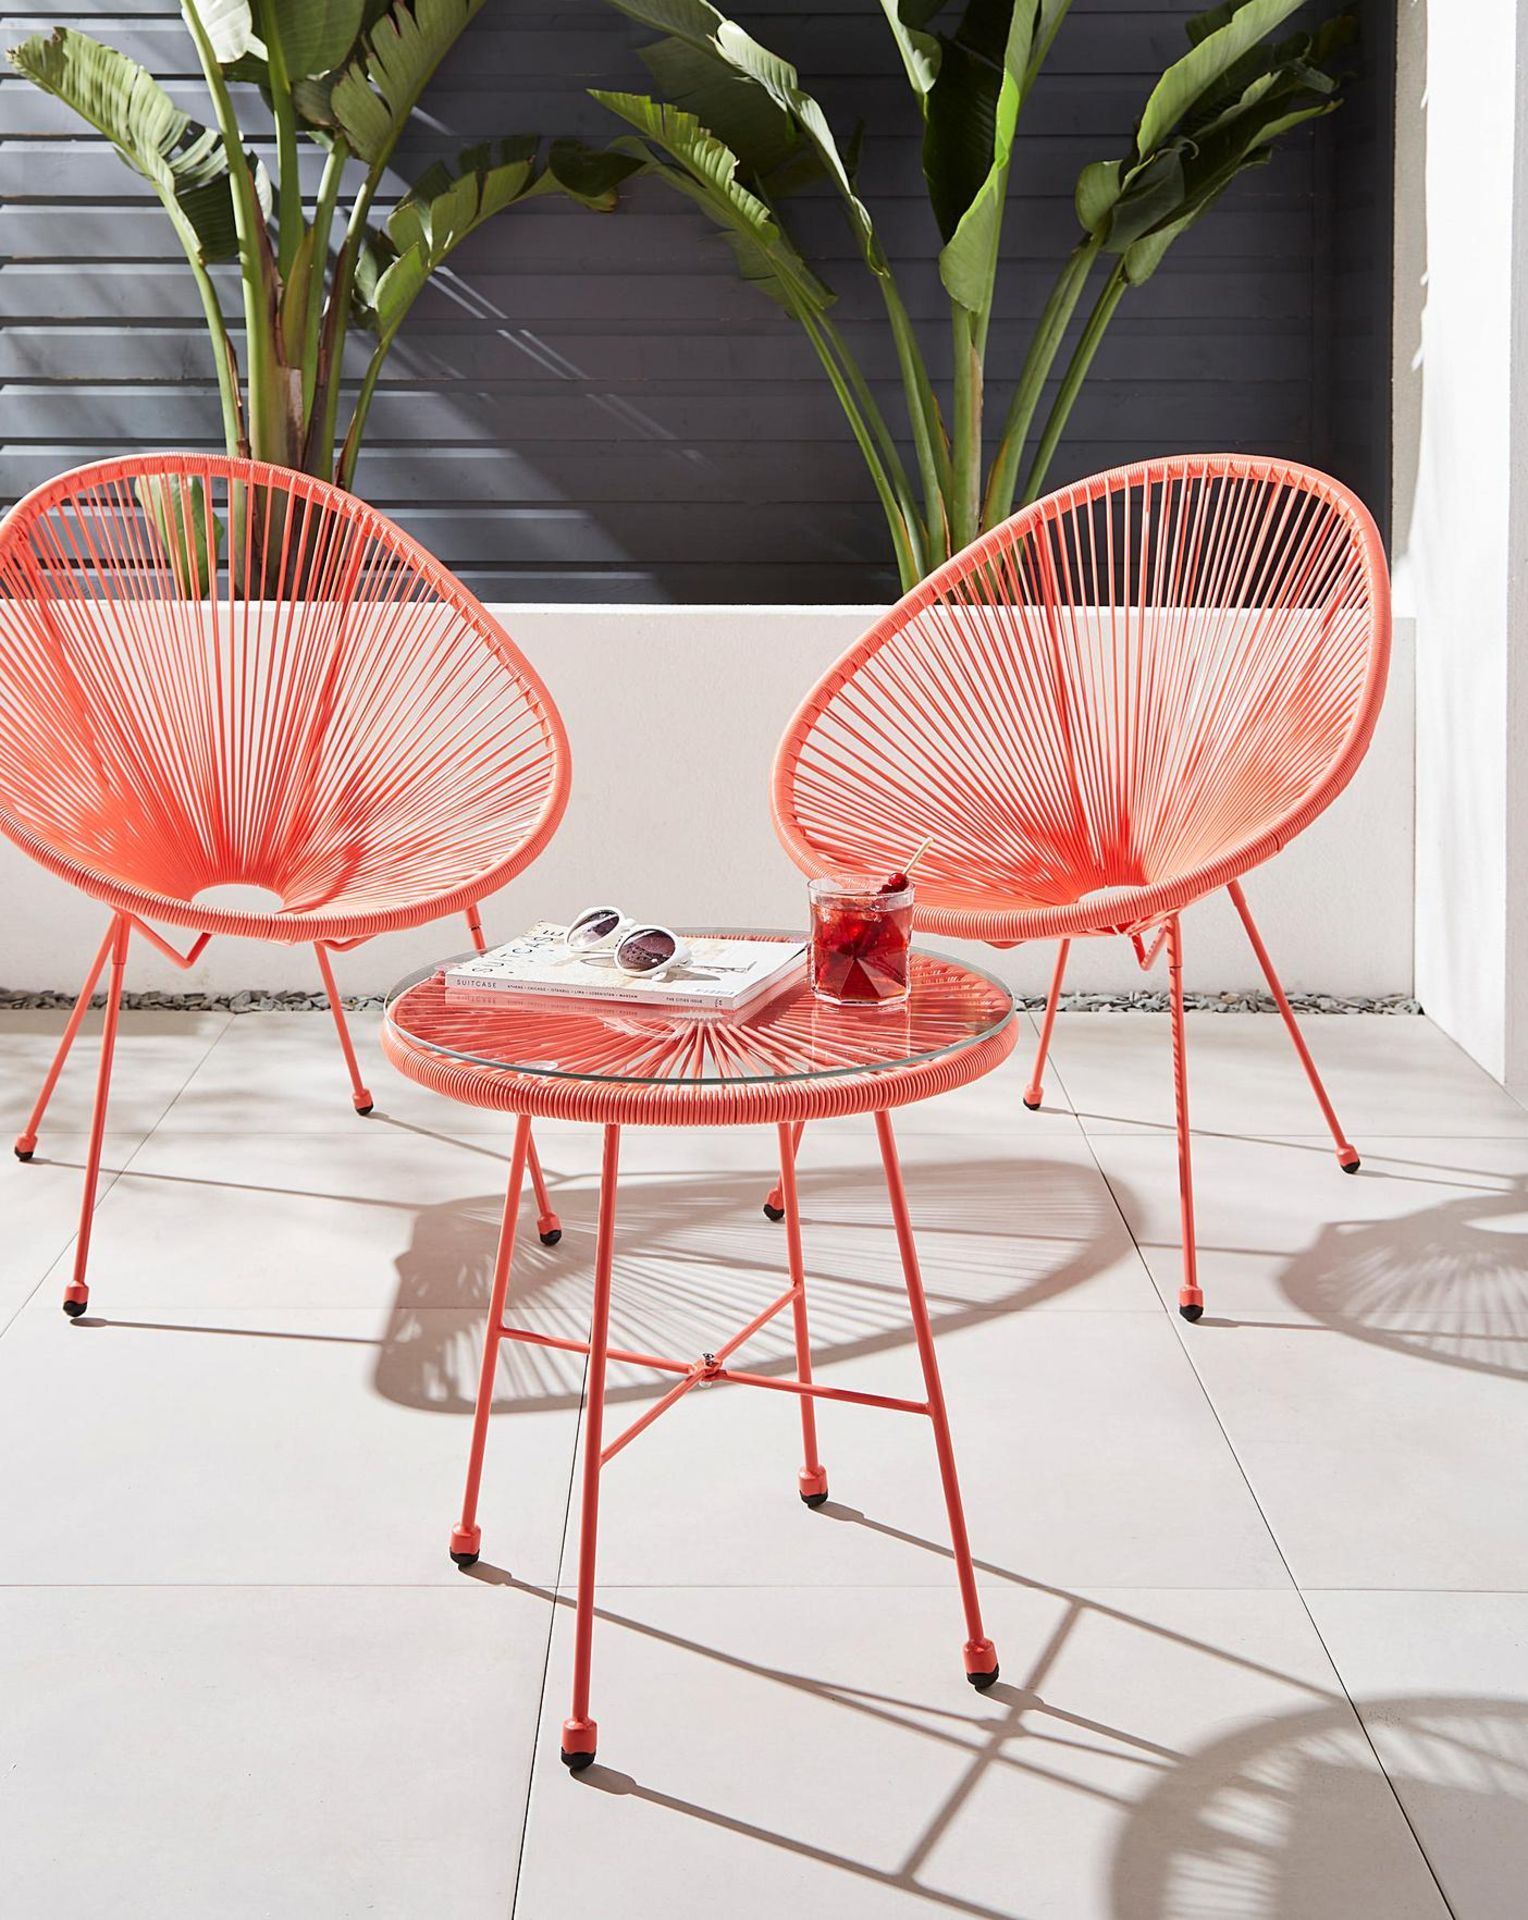 TRADE LOT 10 x New & Boxed Salsa Bistro Lounge Set (CORAL). RRP £349.99 each. The Salsa Bistro